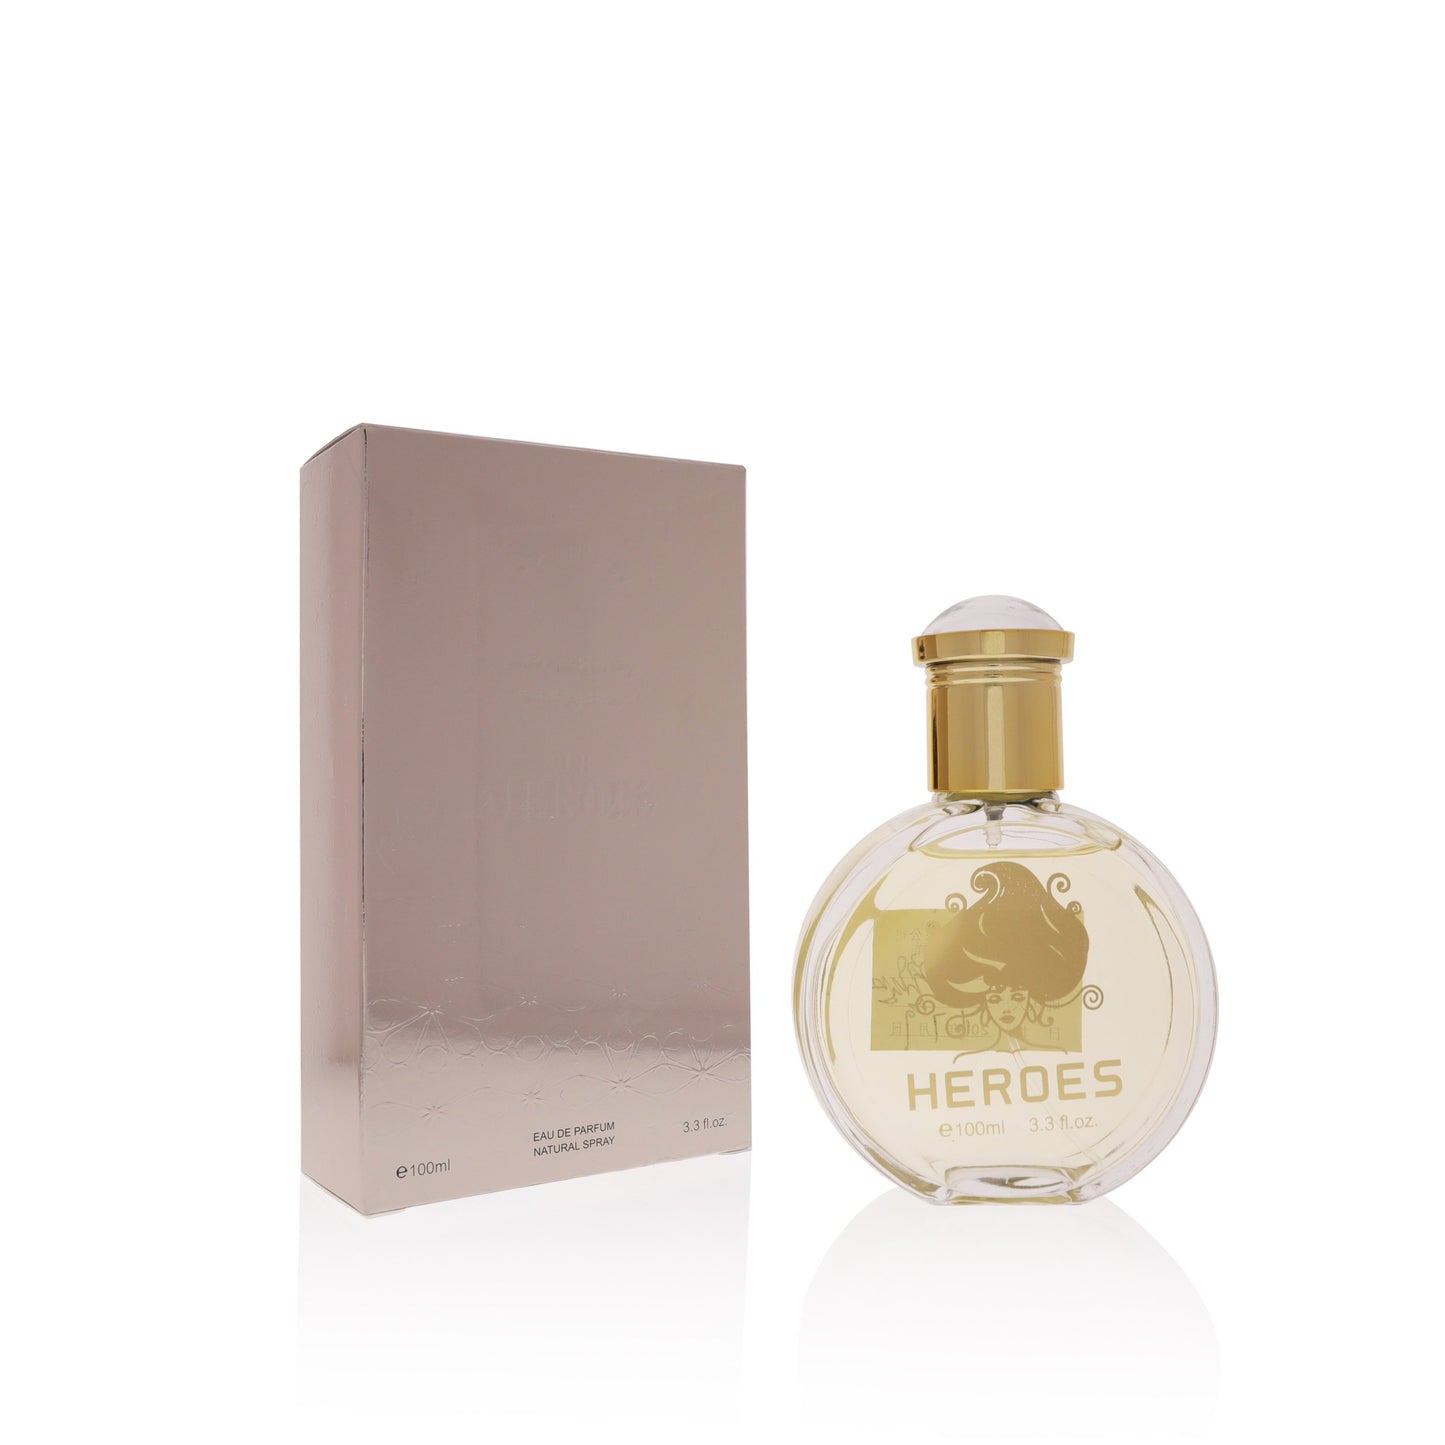 Heroes Women's Fragrance: Channel Your Inner Strength and Confidence with this Empowering and Captivating Scent - A Must-Have for the Modern Woman's Collection!